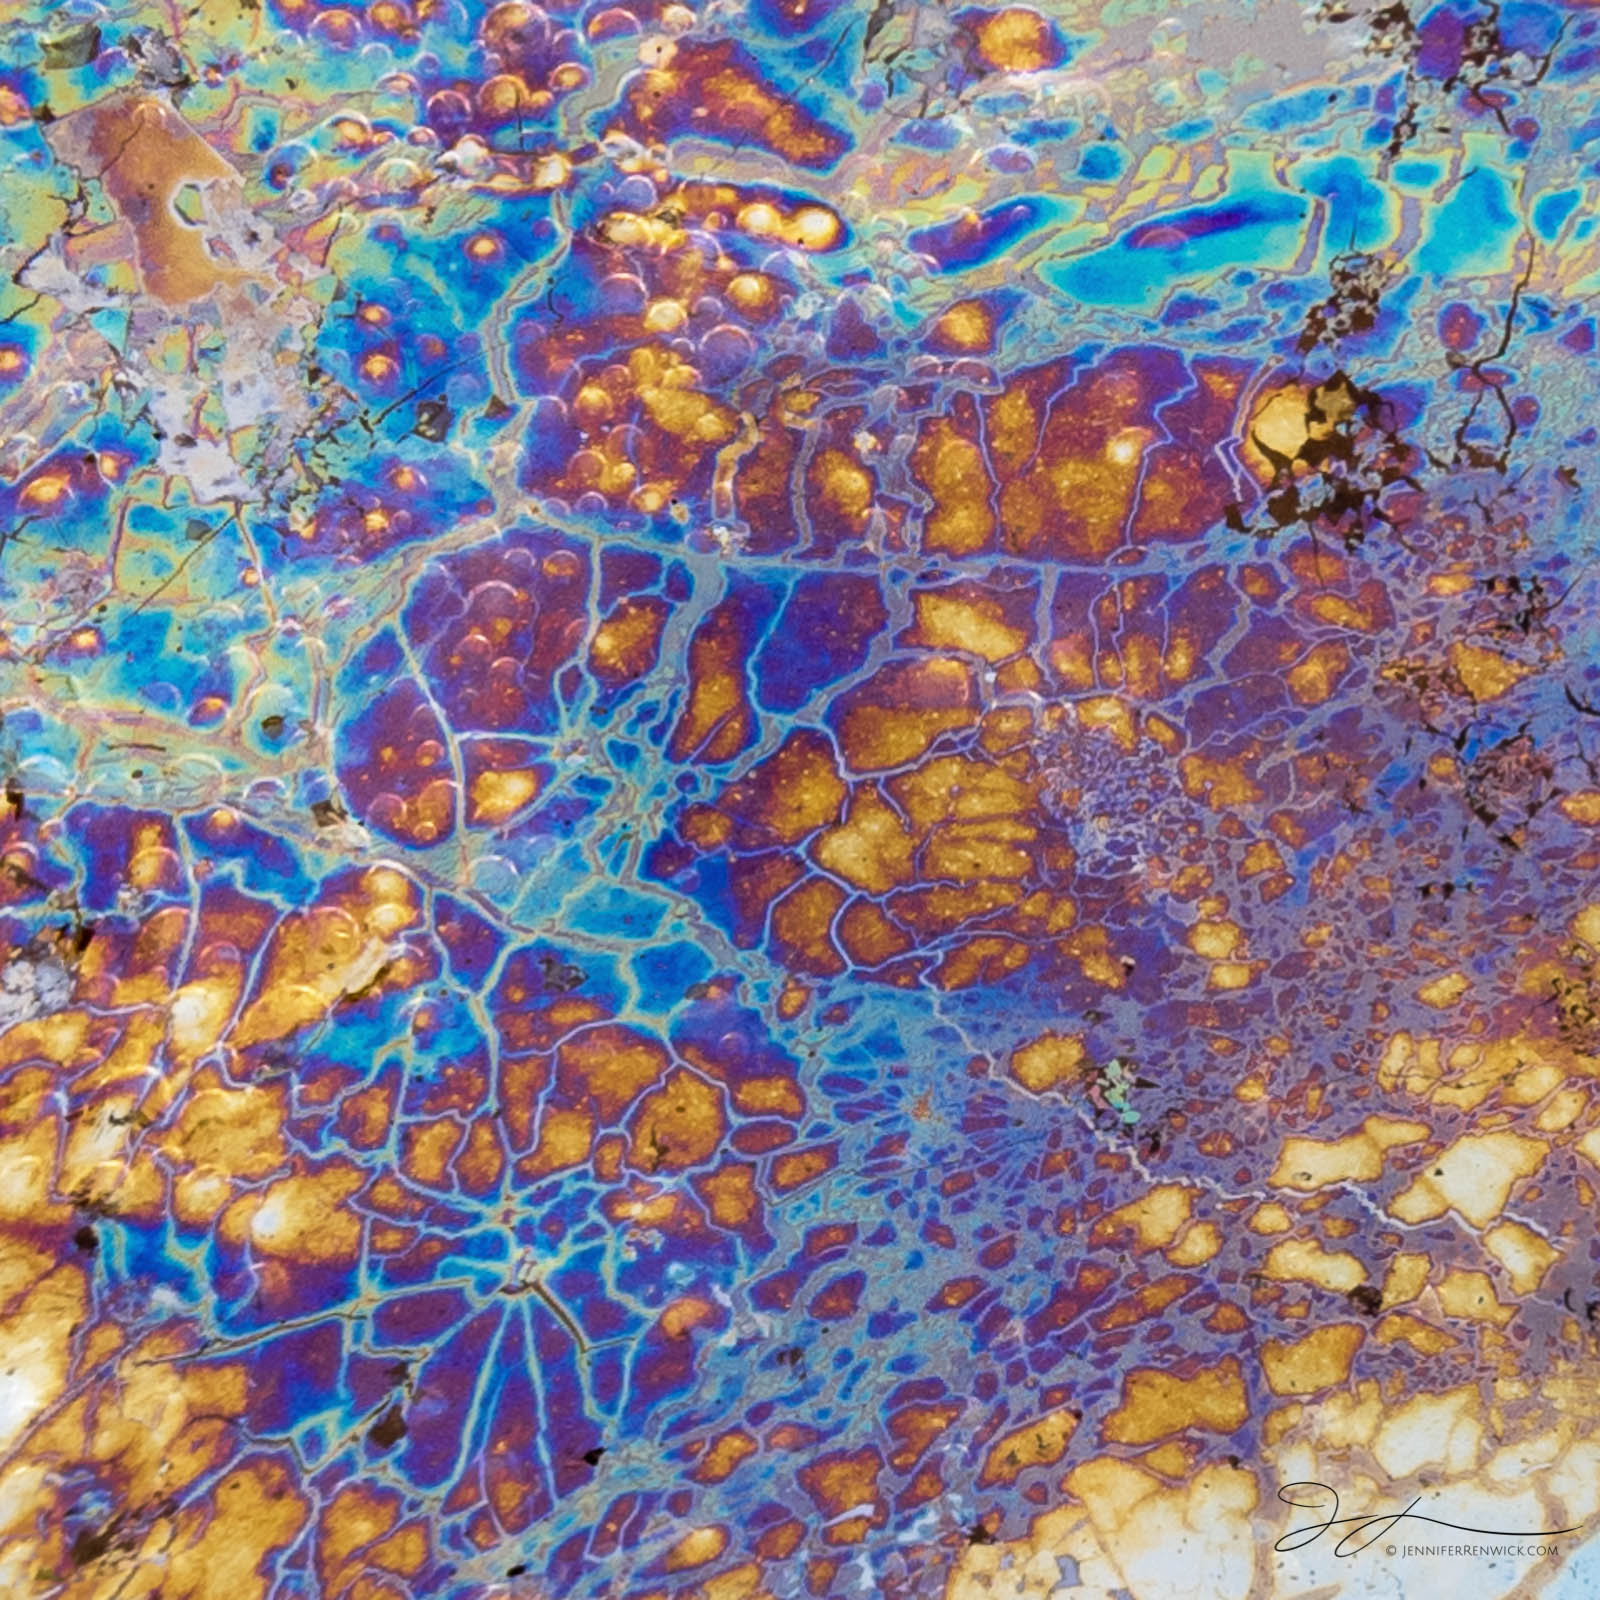 A highway of blues makes a web across a puddle of natural oil with bubbles.